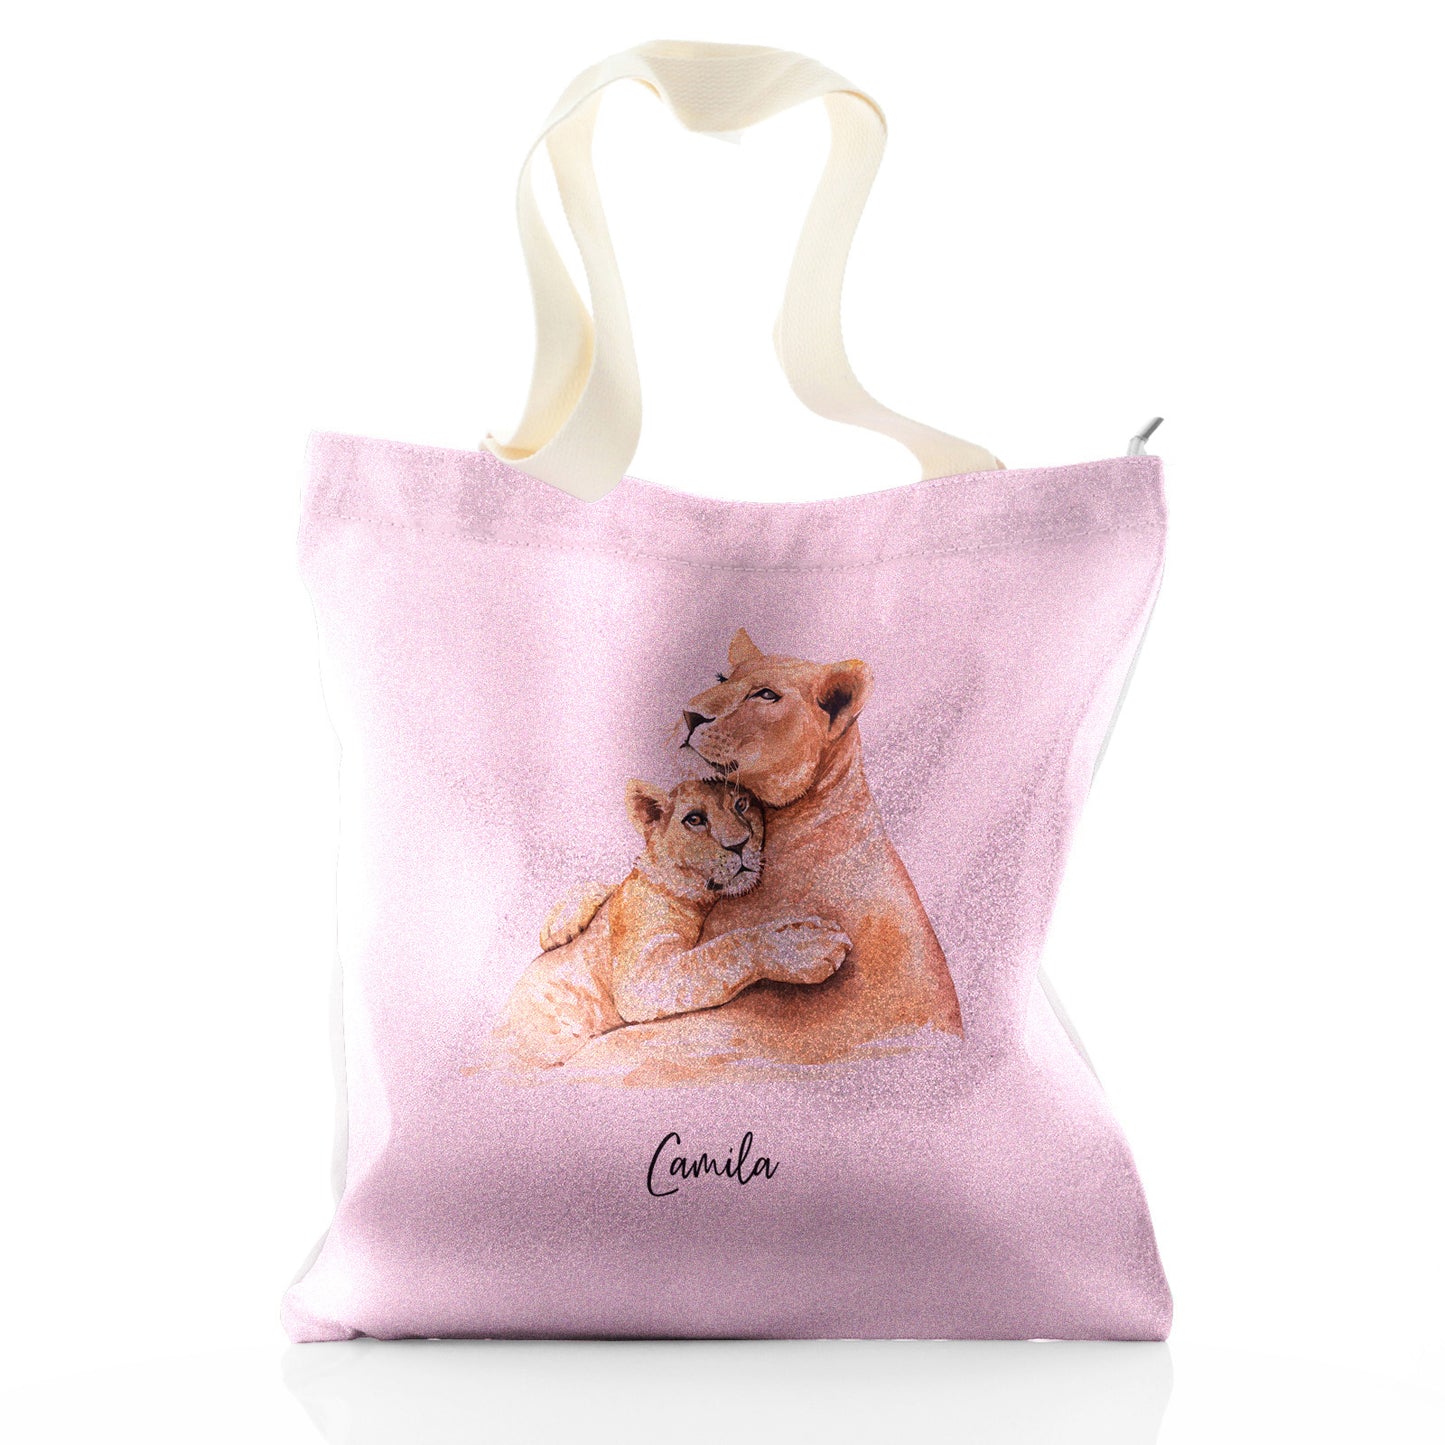 Personalised Glitter Tote Bag with Welcoming Text and Embracing Mum and Baby Lions